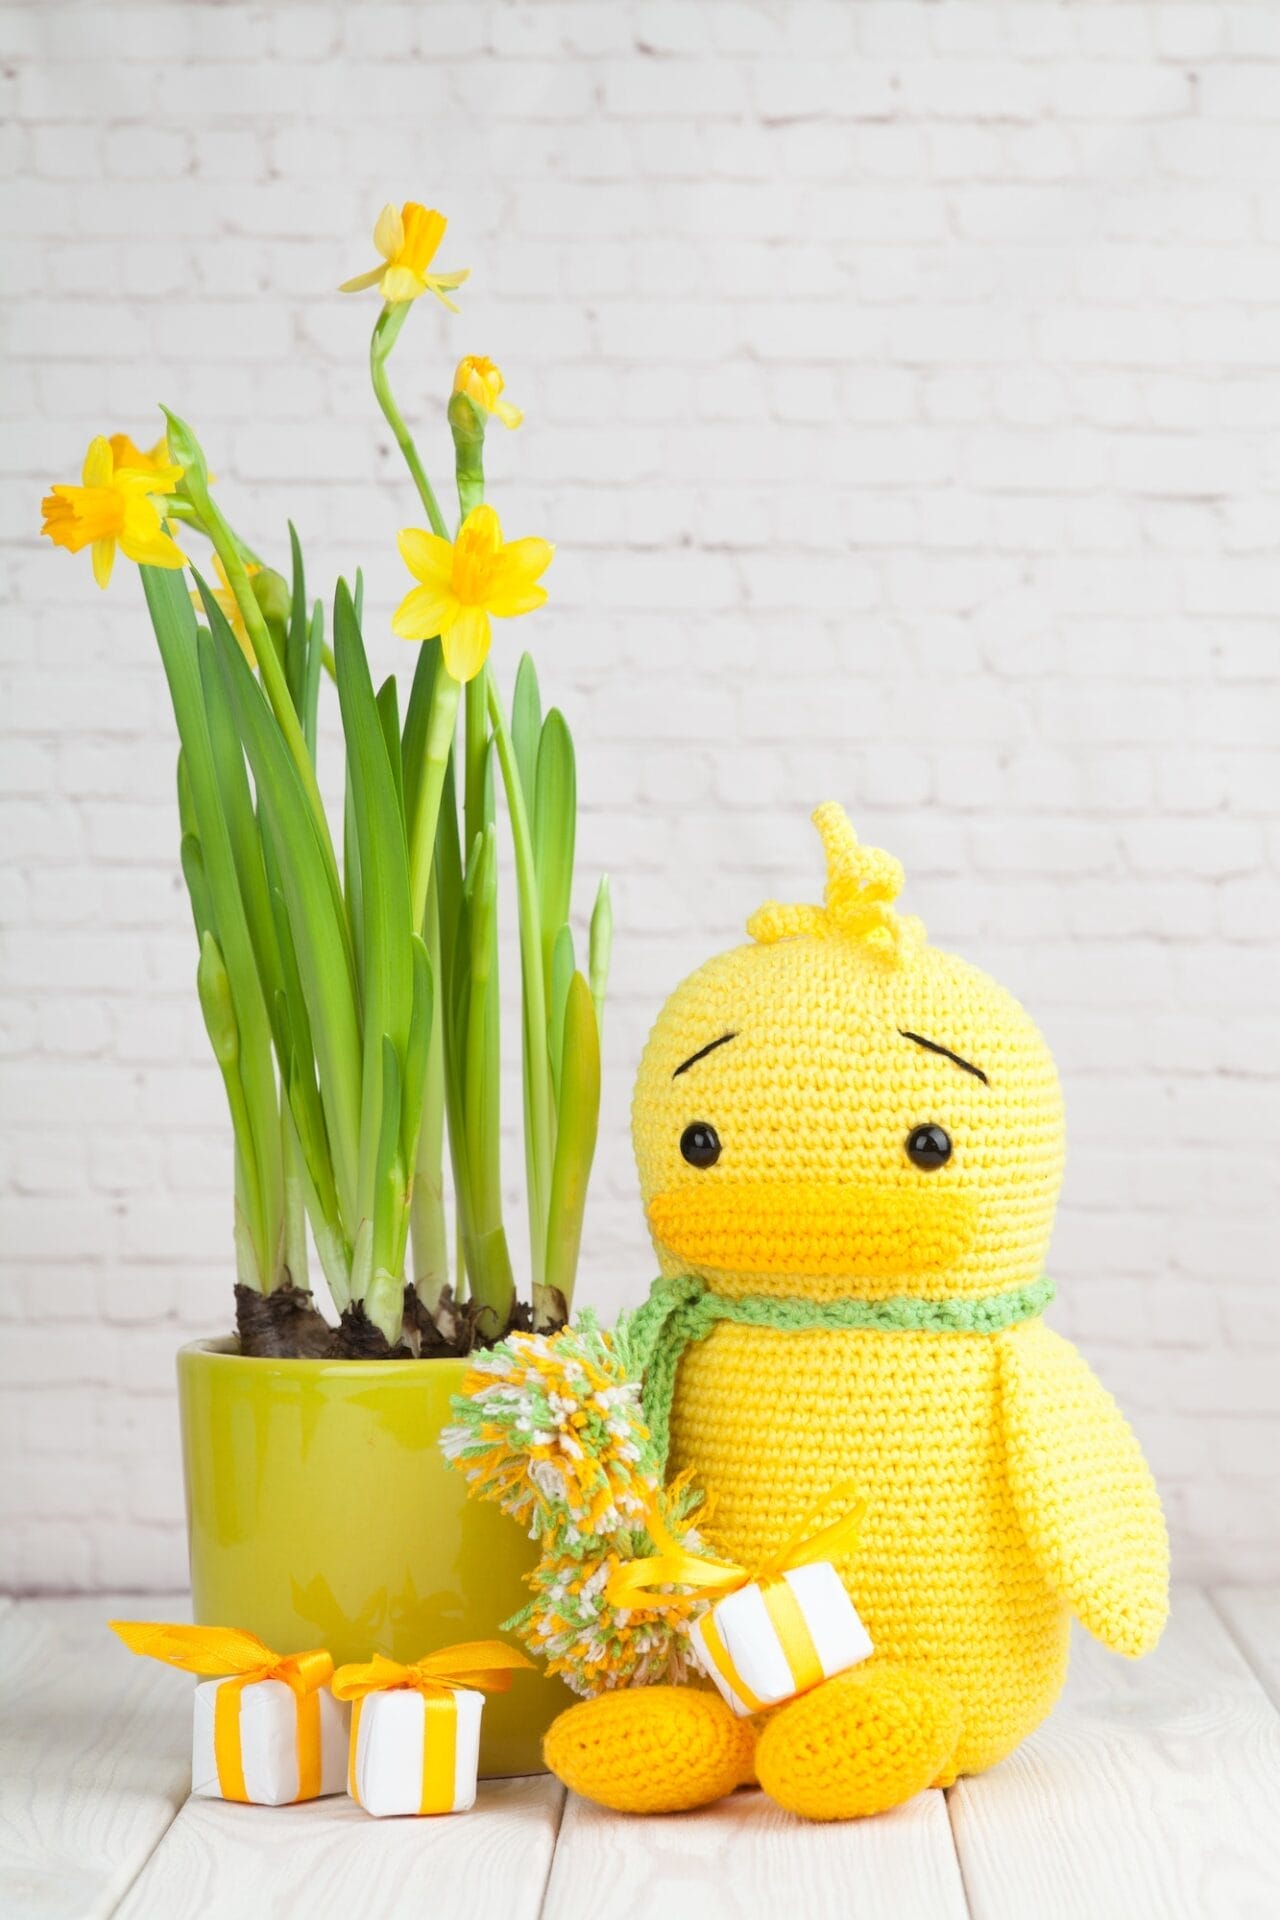 spring easter composition - a pot of daffodils and a knitted duck